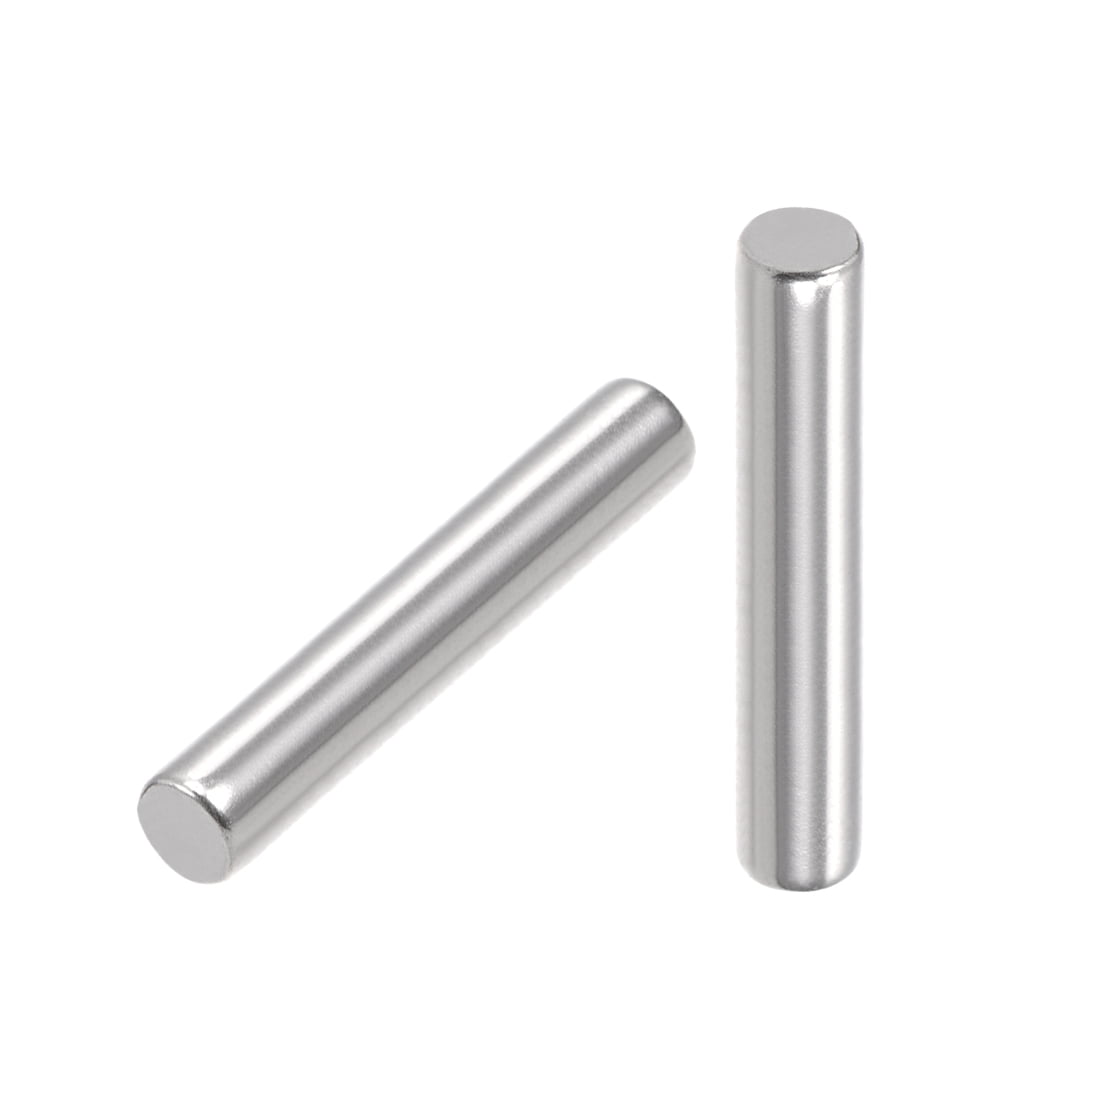 uxcell 100Pcs 2mm x 22mm Dowel Pin 304 Stainless Steel Shelf Support Pin Fasten Elements Silver Tone 